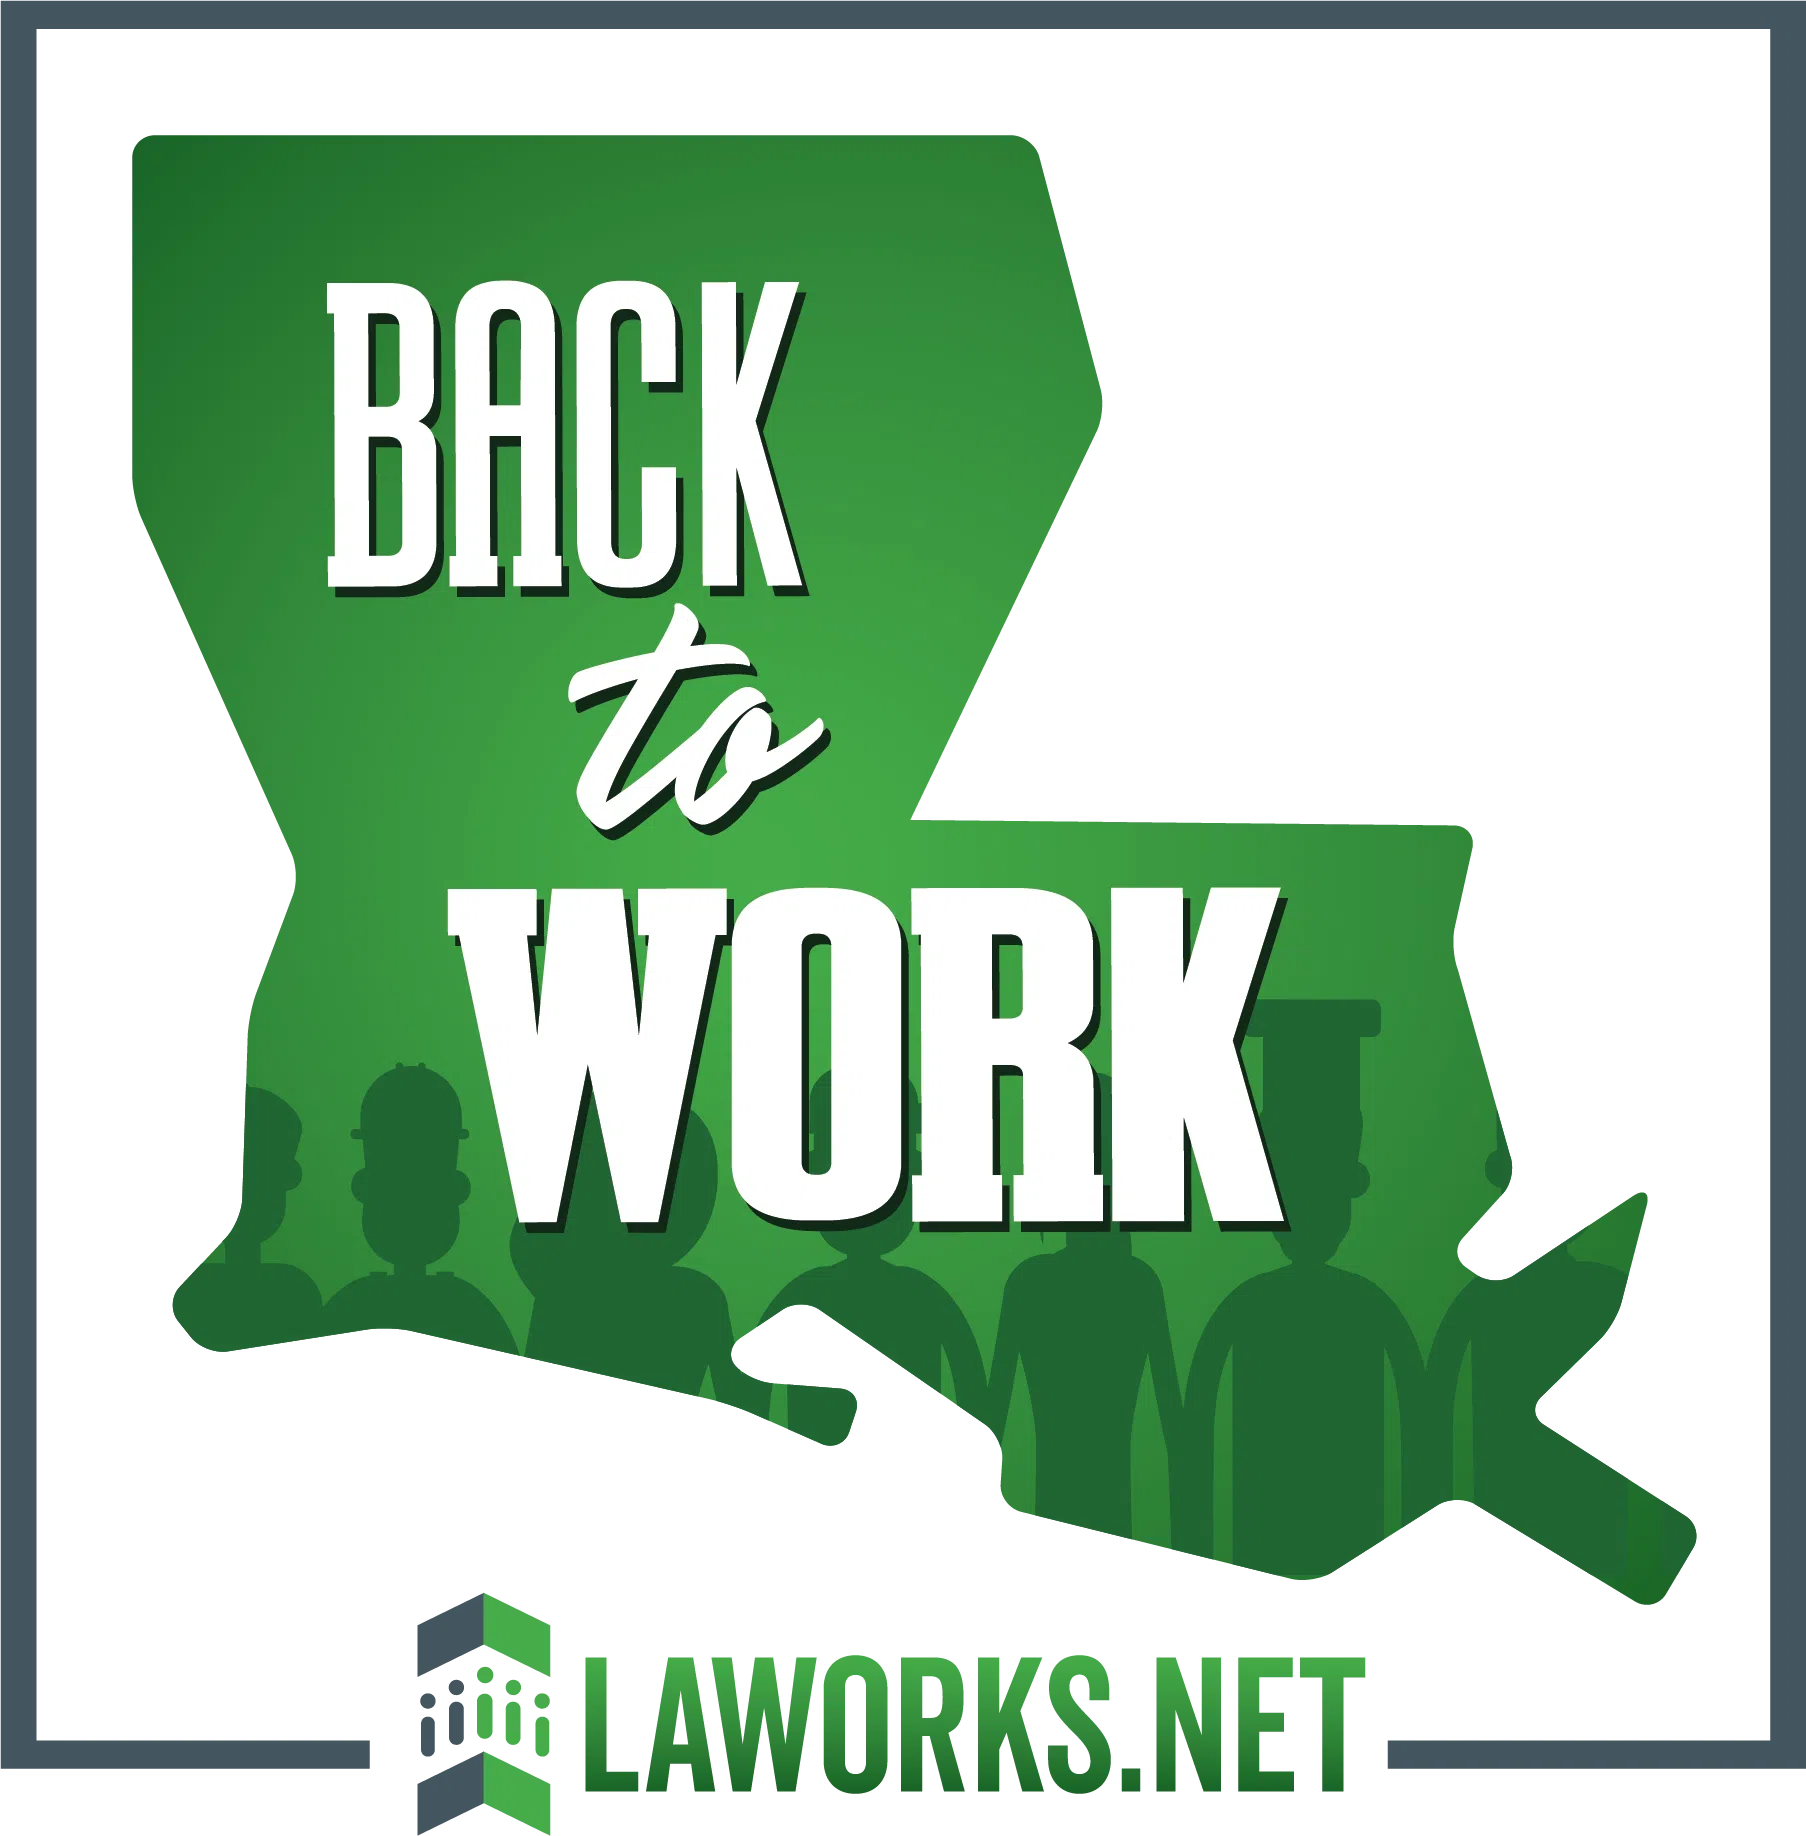 LWC launches effort to get Louisianans back to work as federal unemployment benefits end